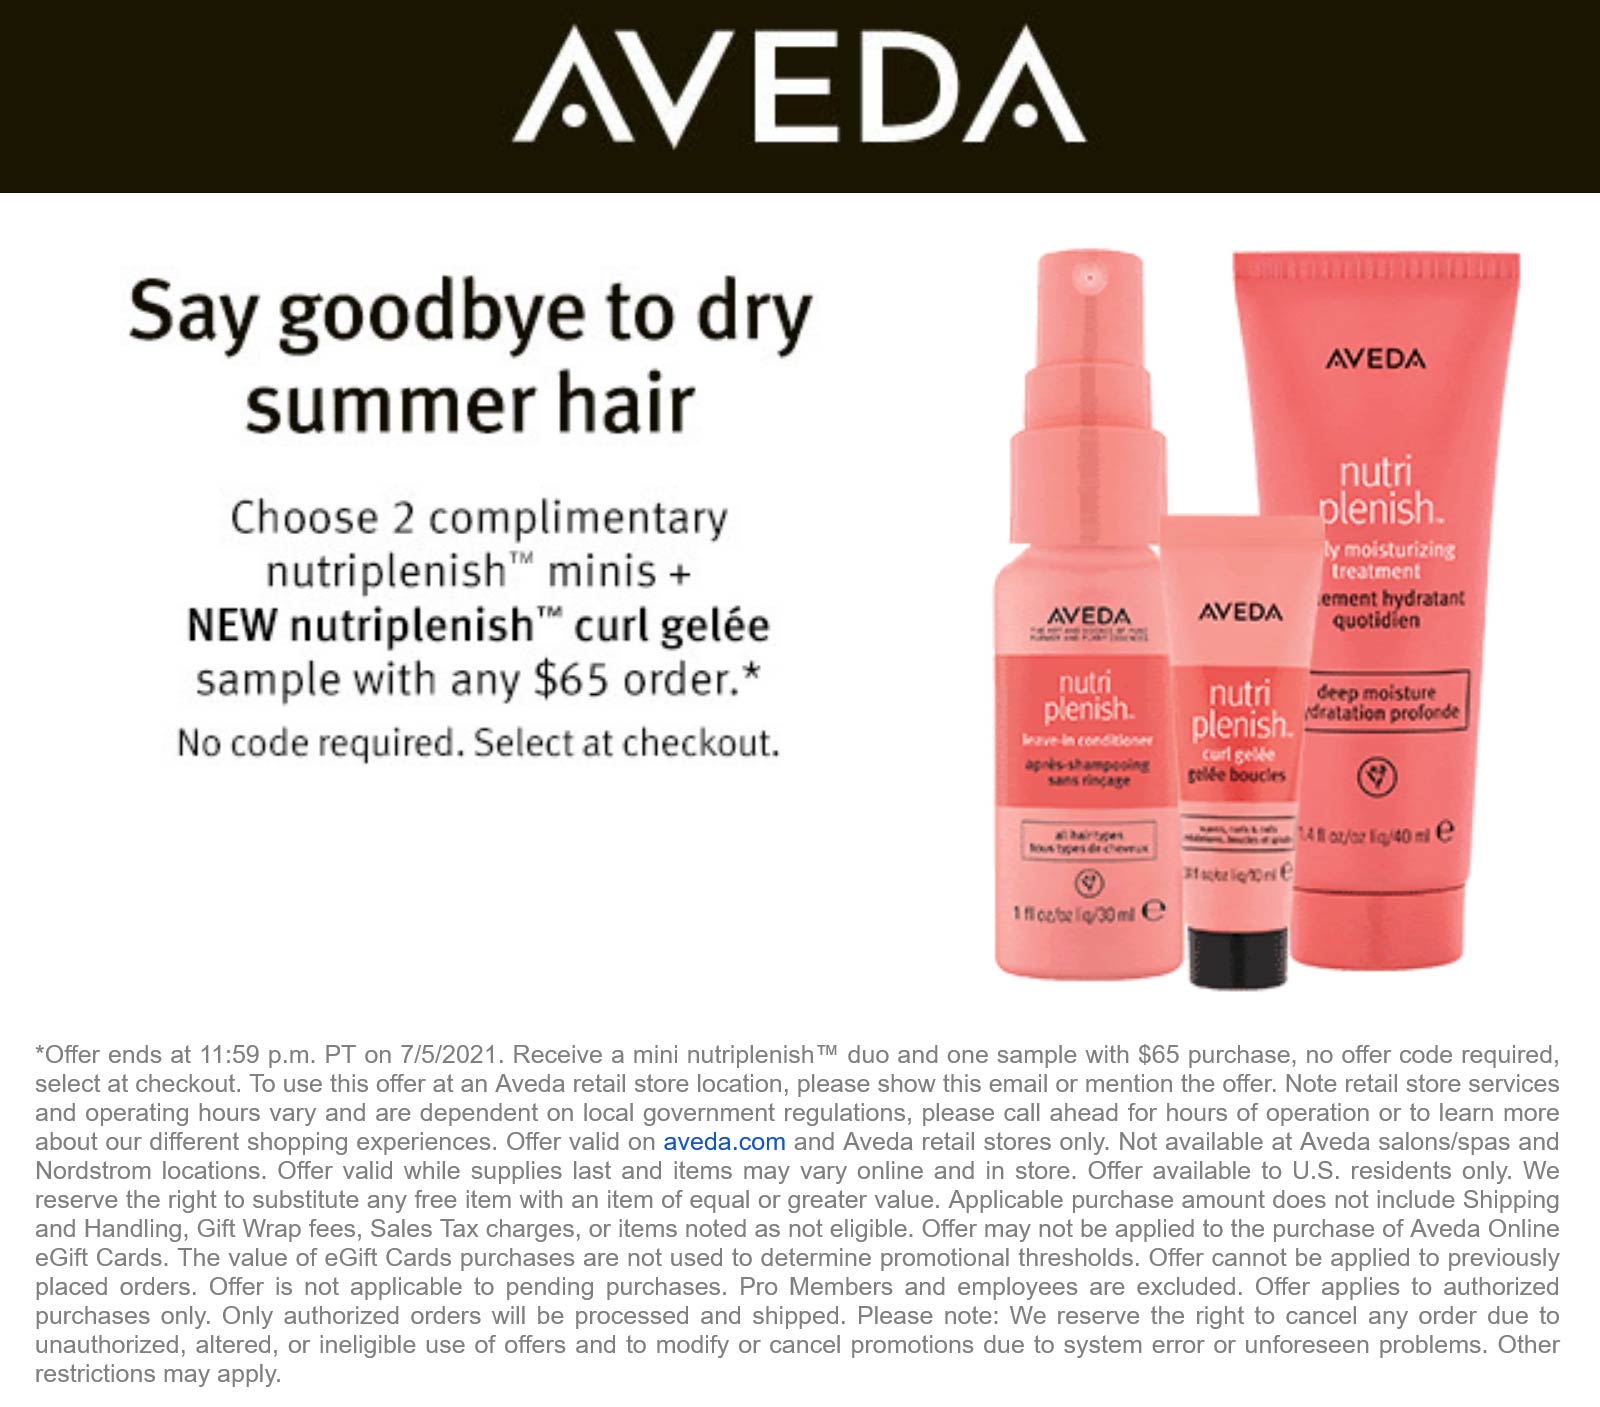 AVEDA stores Coupon  2 free nutriplenish with $65 spent at AVEDA #aveda 